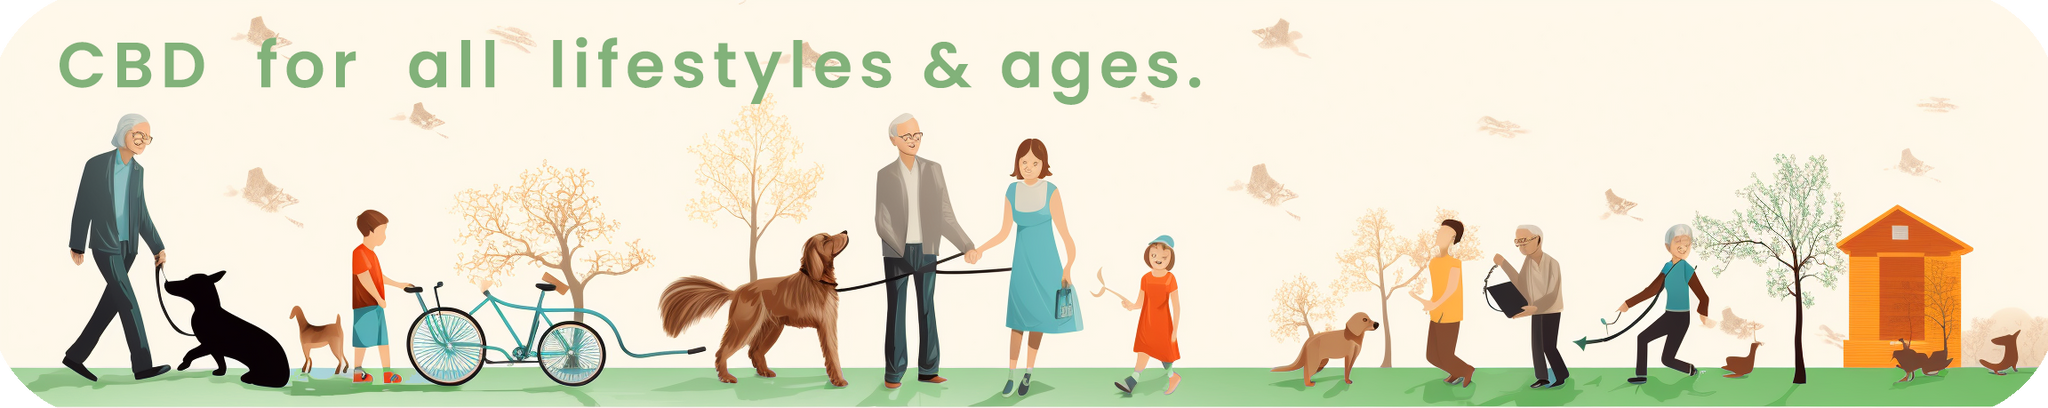 CBD "for all ages and lifestyles" banner